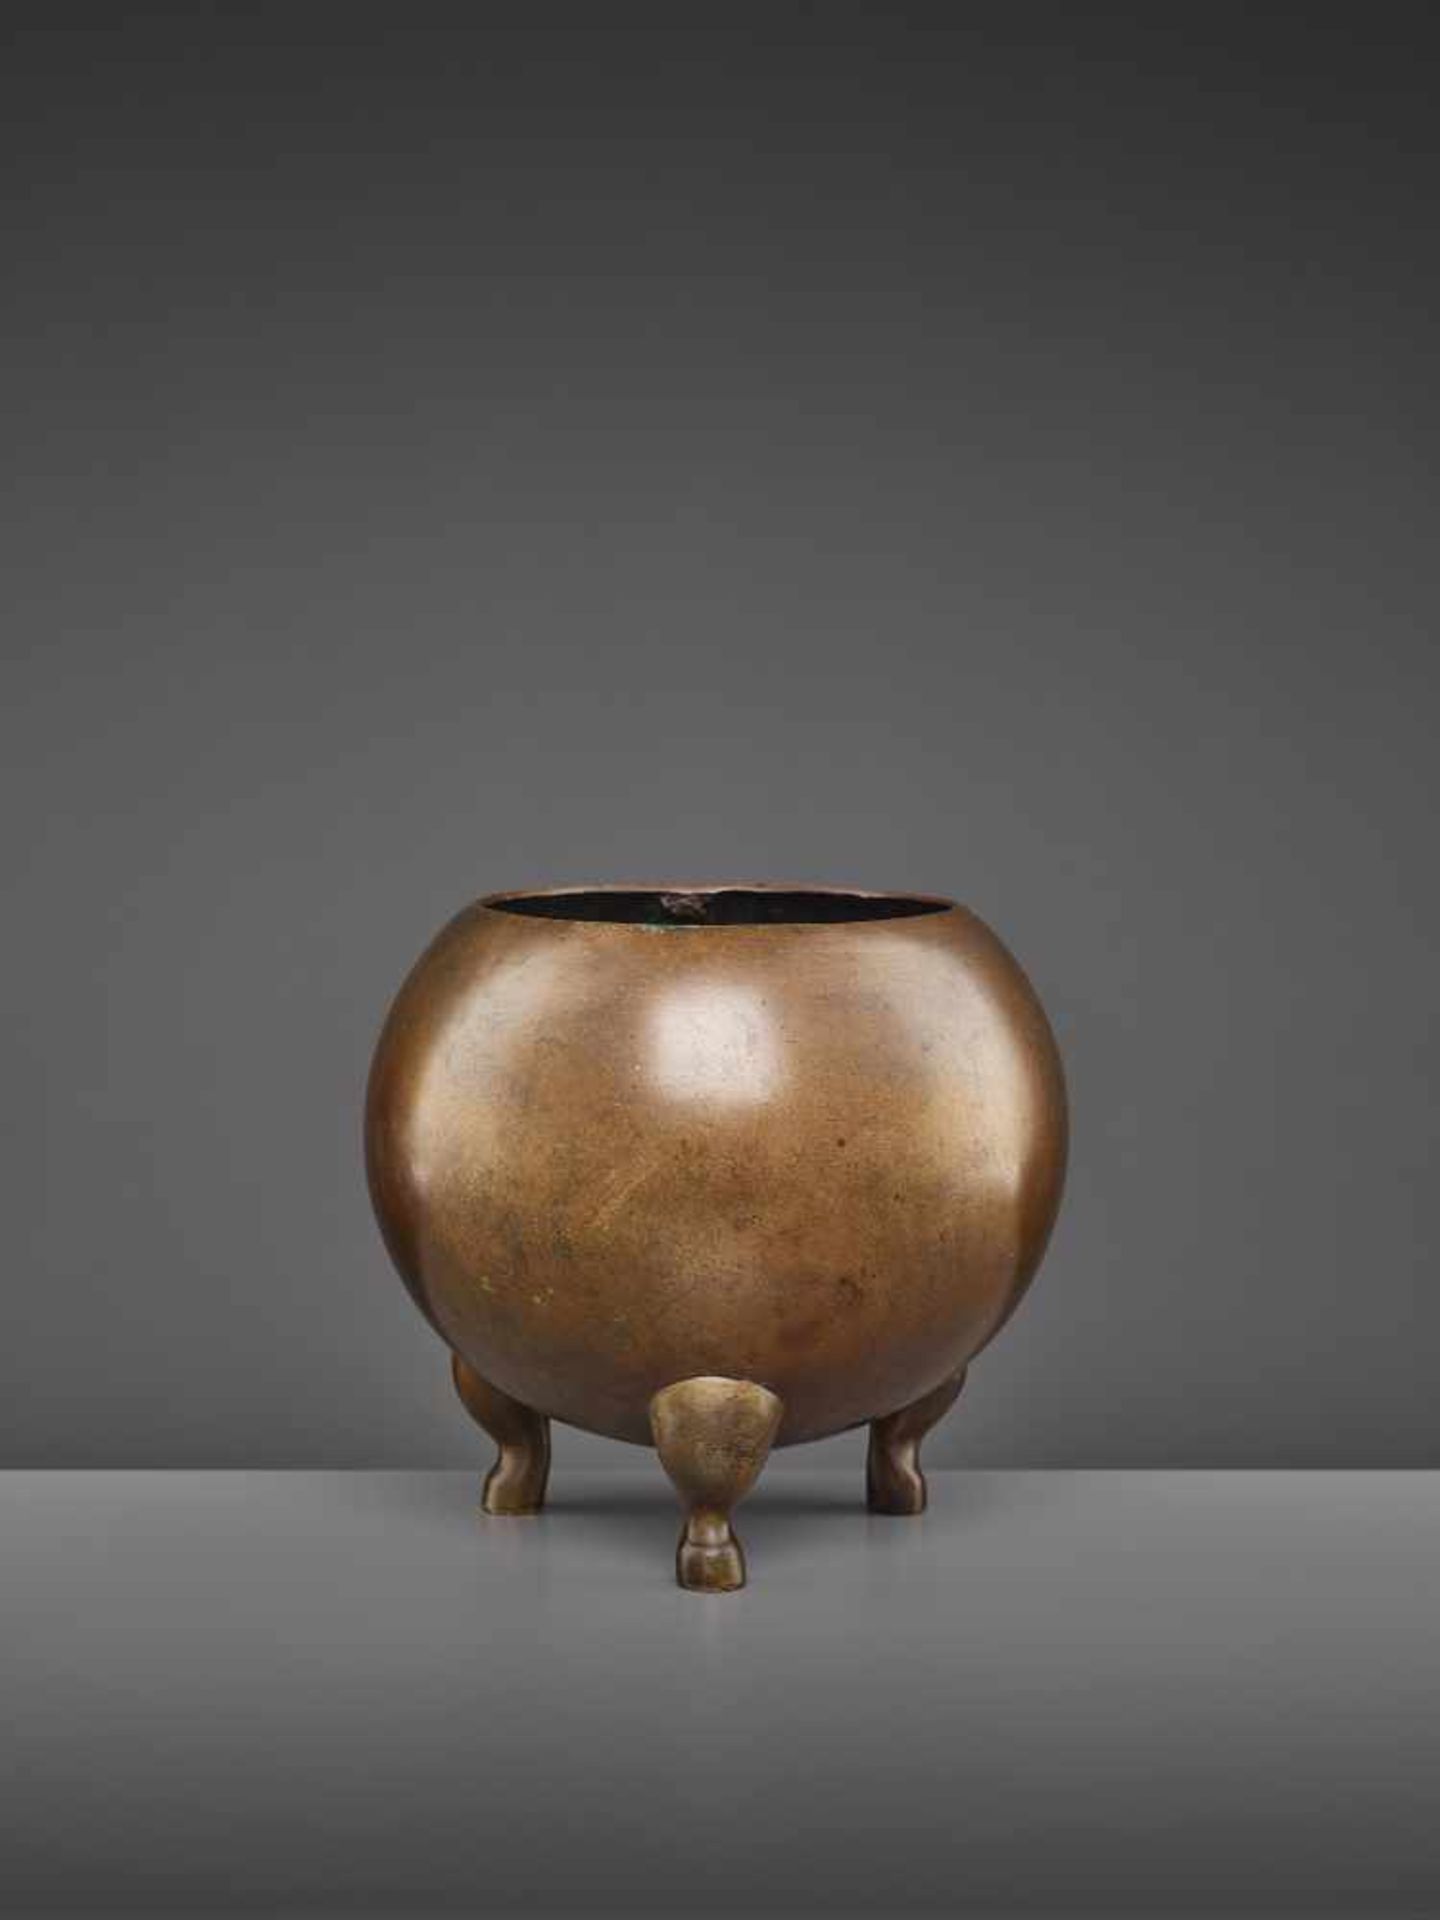 A RARE TRIPOD CENSER EARLY QINGChina, late 17th-earlier 18th century. The large vessel of simple yet - Image 5 of 9